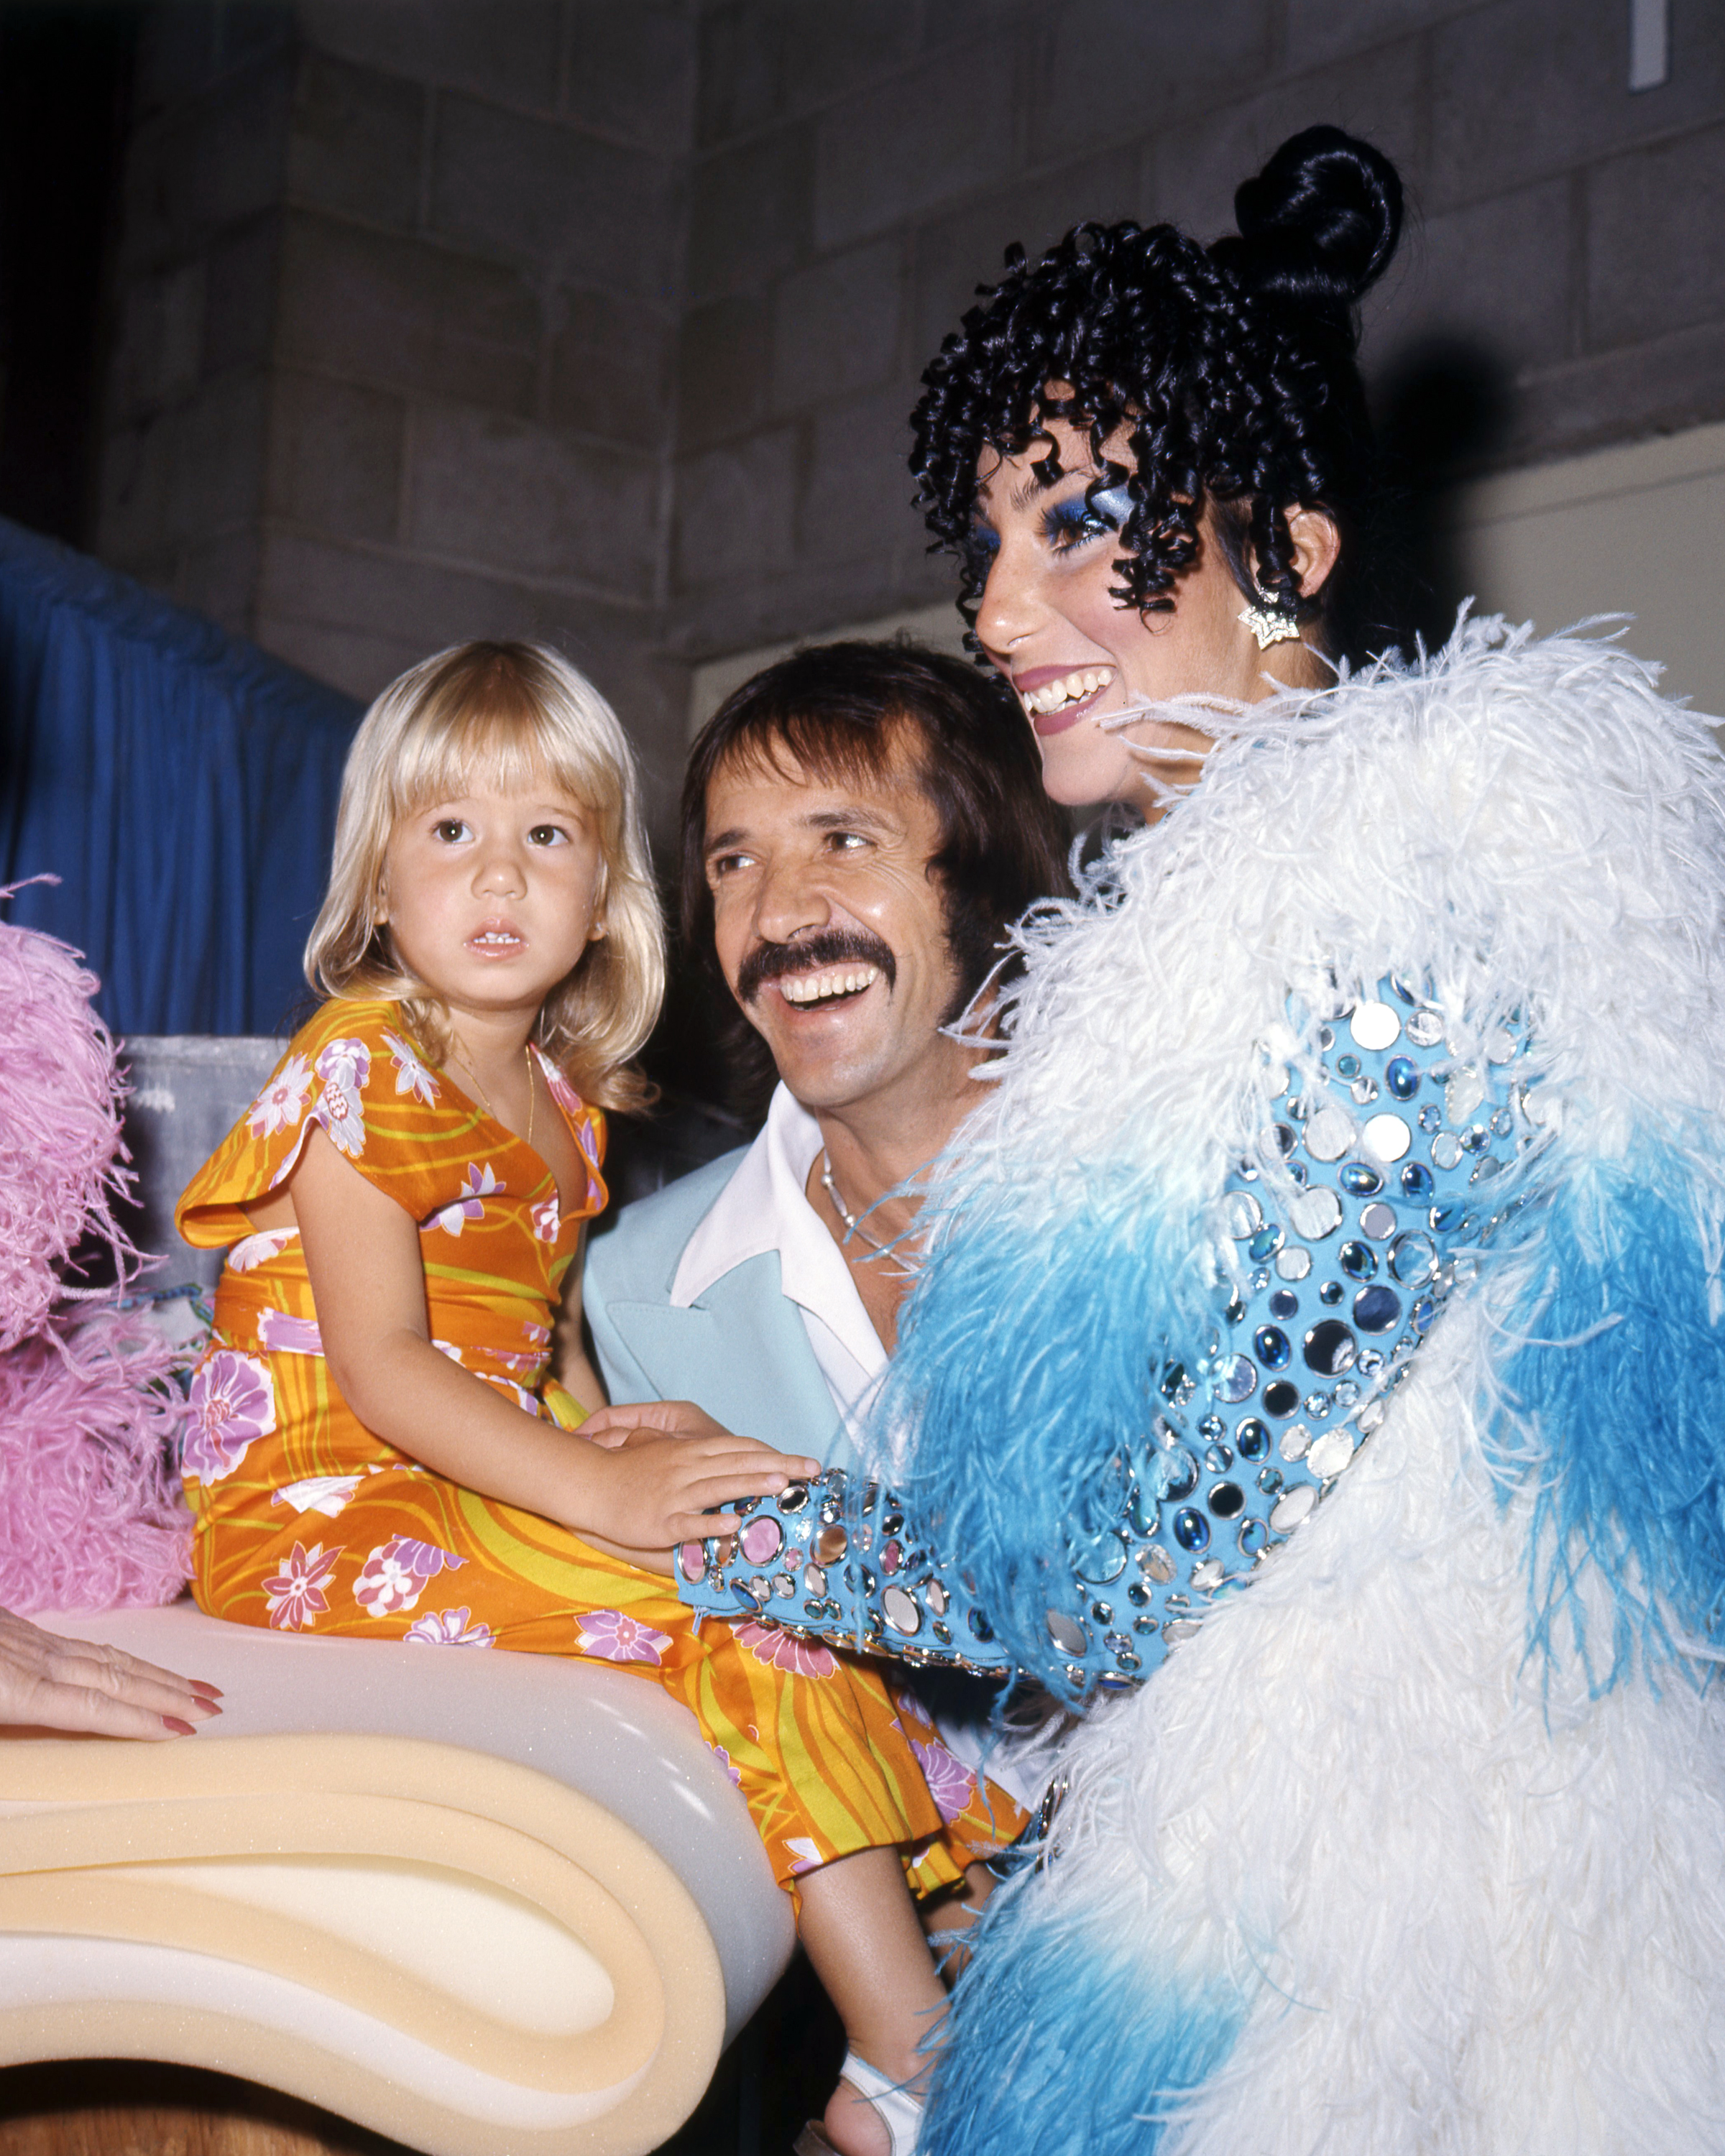 Sonny, Cher, and Chastity Bono, circa 1973. | Source: Getty Images